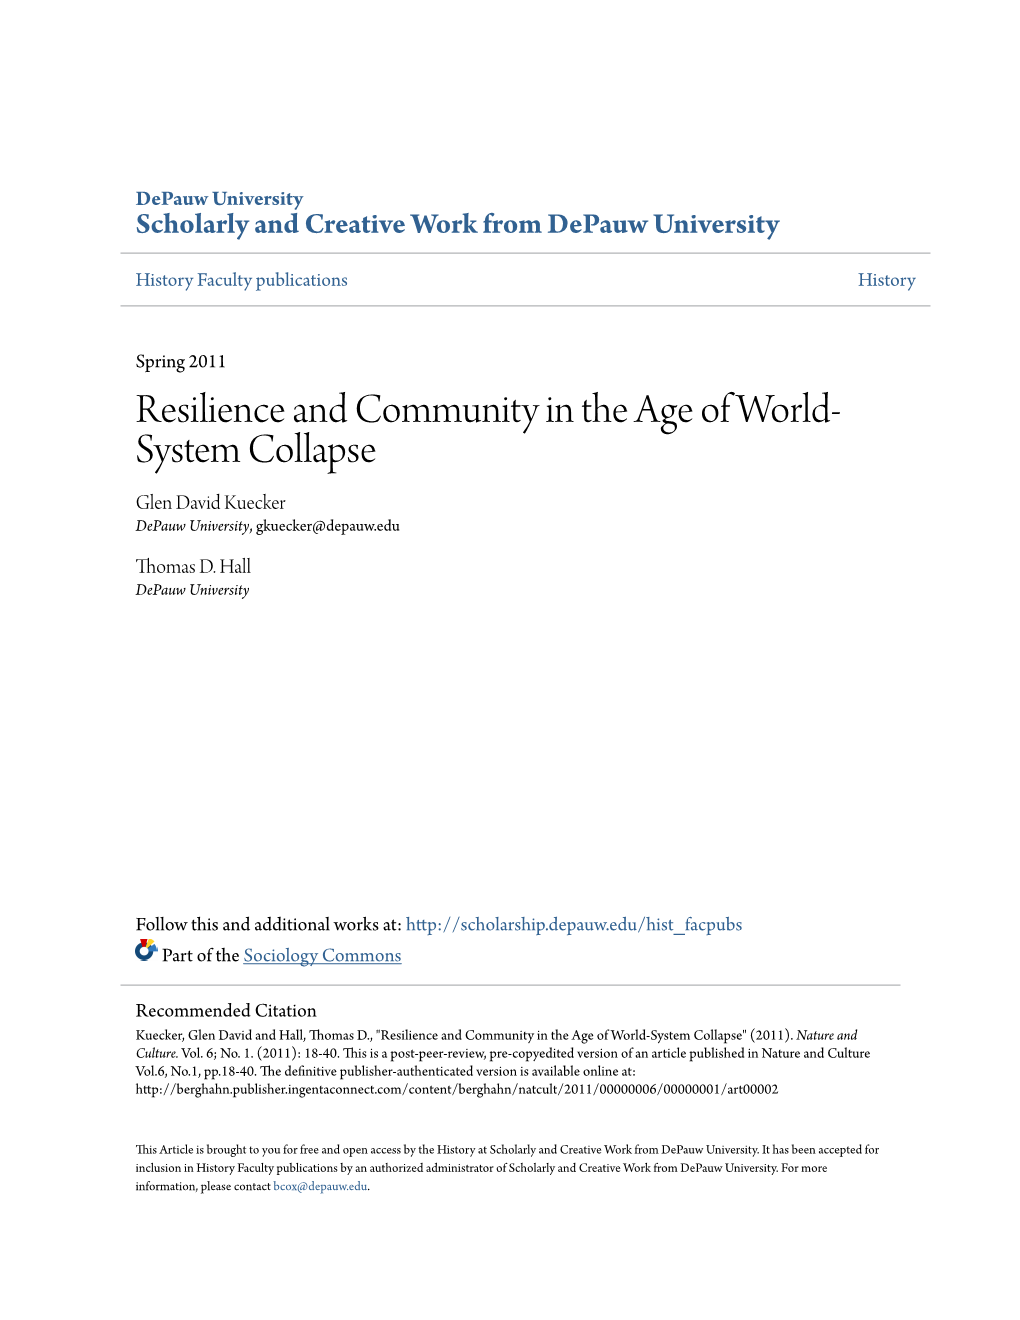 Resilience and Community in the Age of World-System Collapse" (2011)